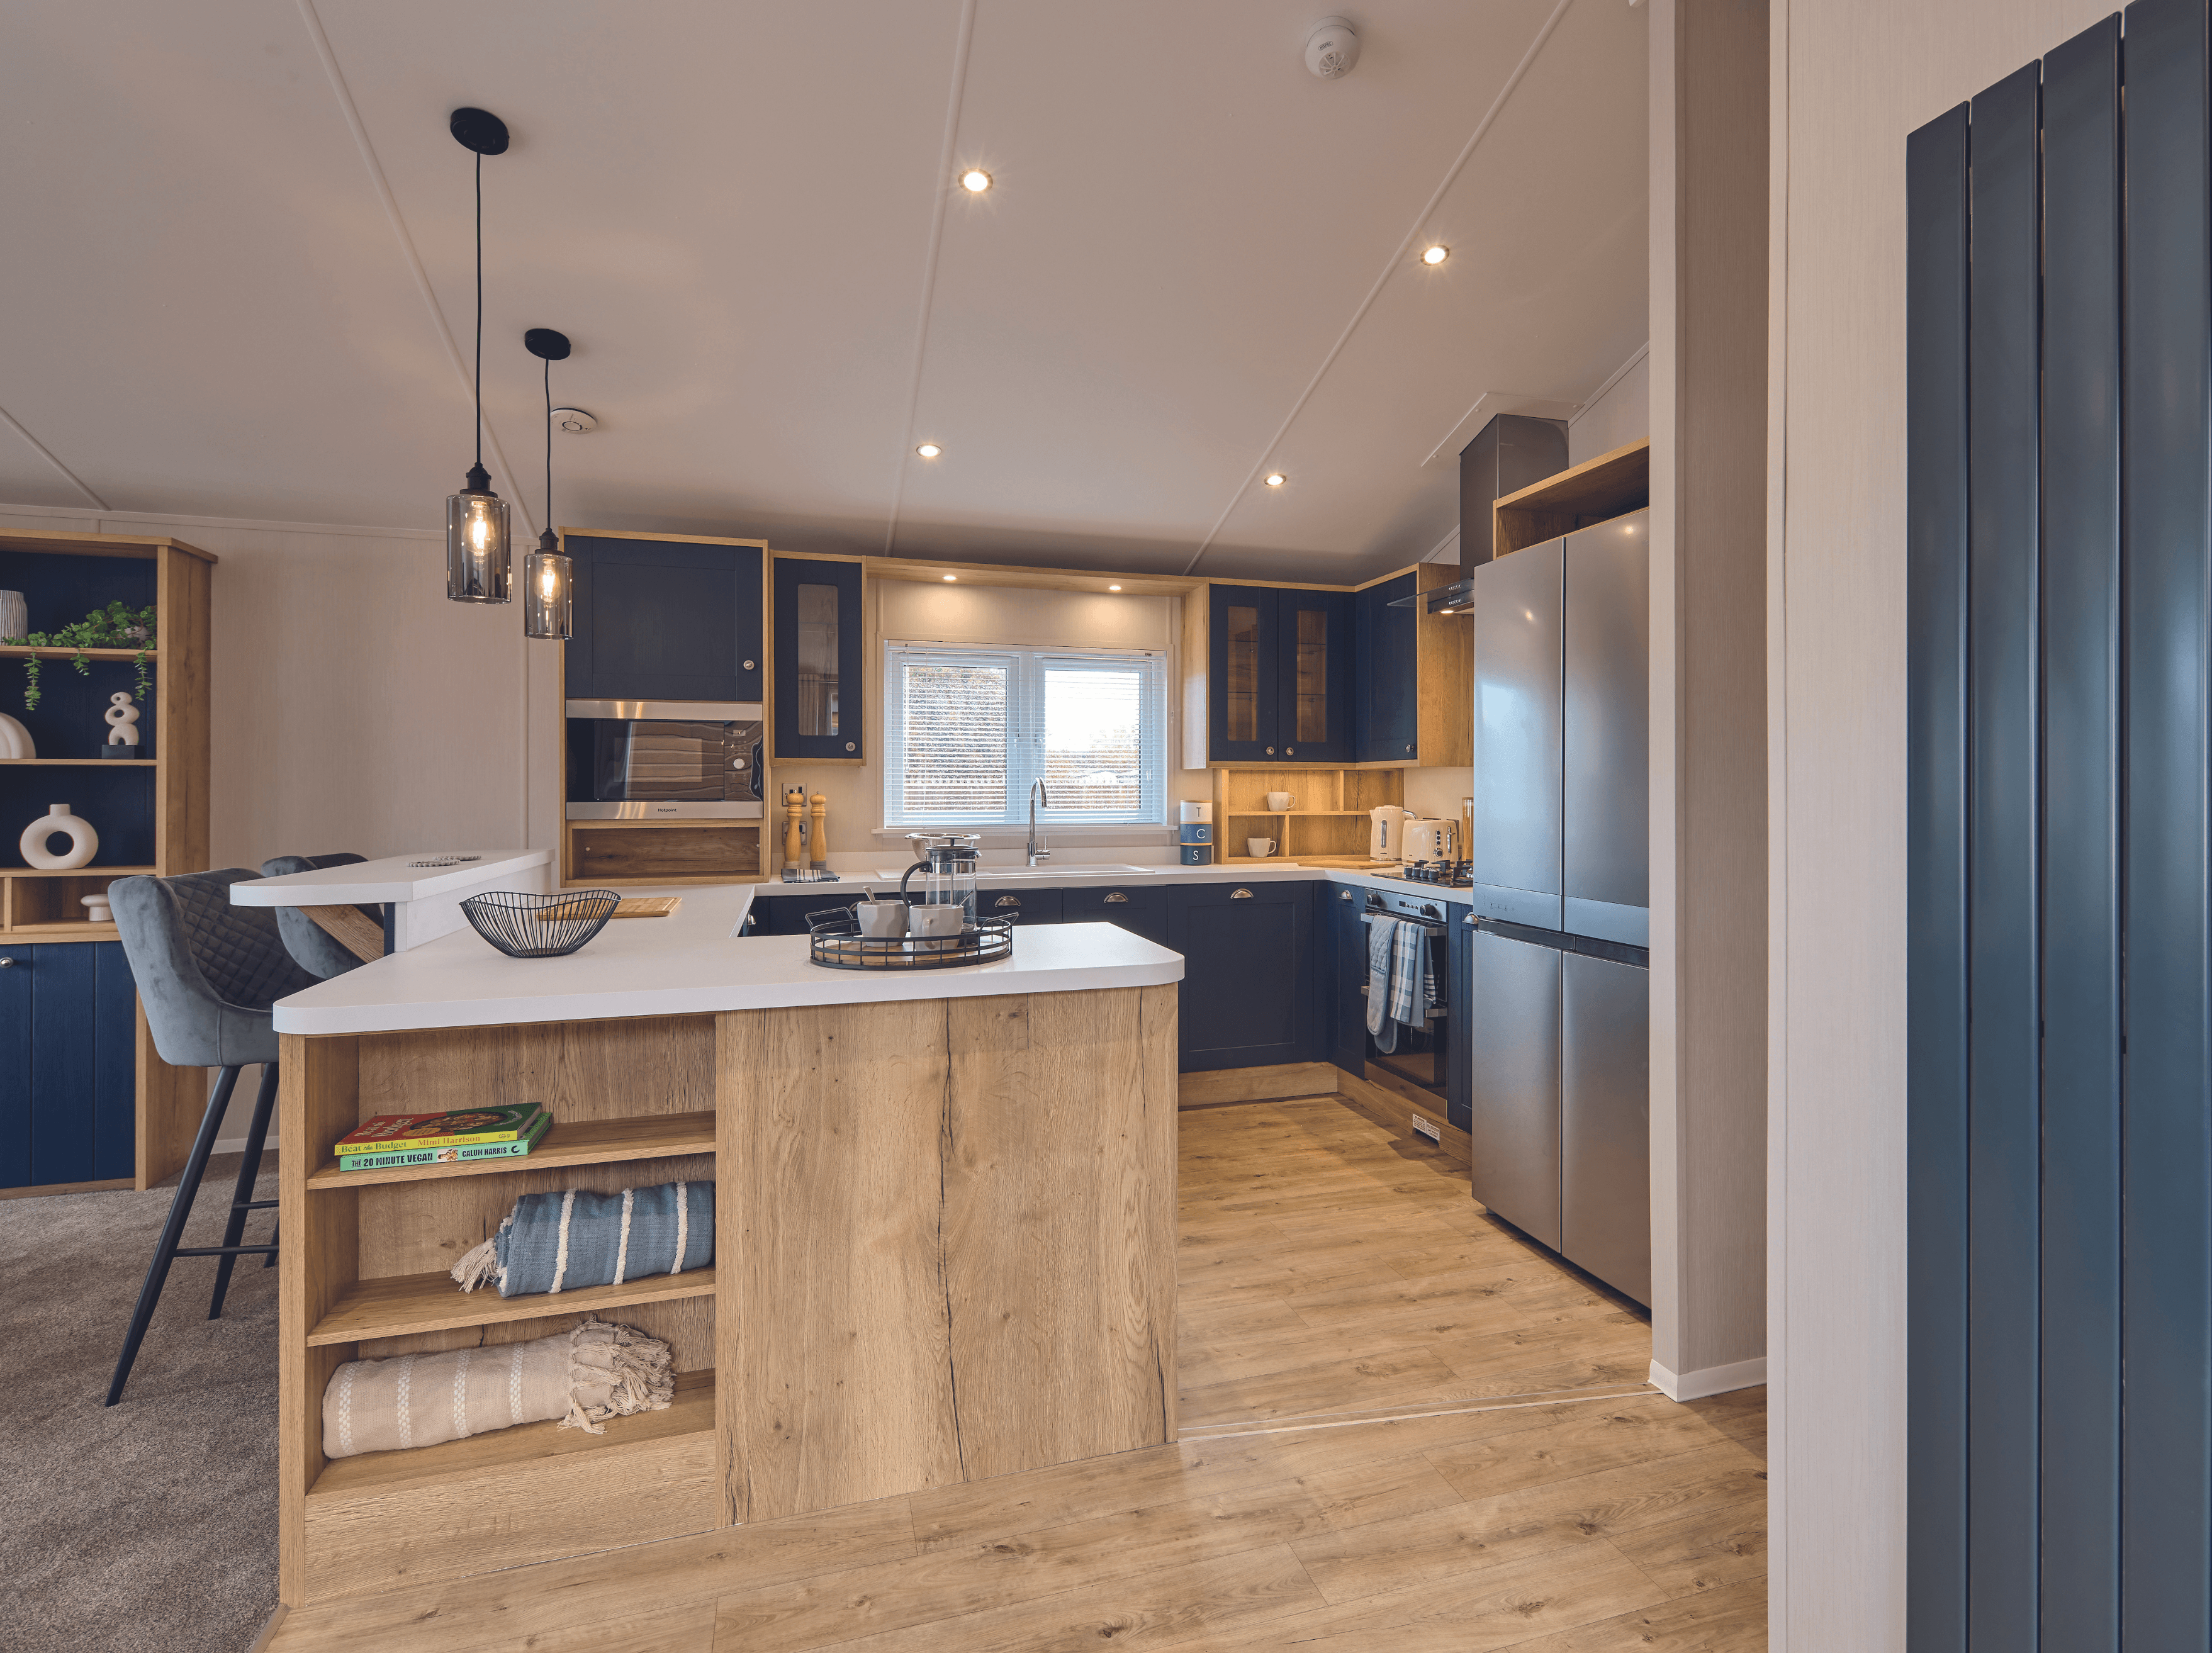 The open plan kitchen-diner of the Willerby New Holland holiday lodge. The colour scheme is dark blue and white with wooden units. The kitchen is spacious with a large fridge and there is a breakfast bar. 